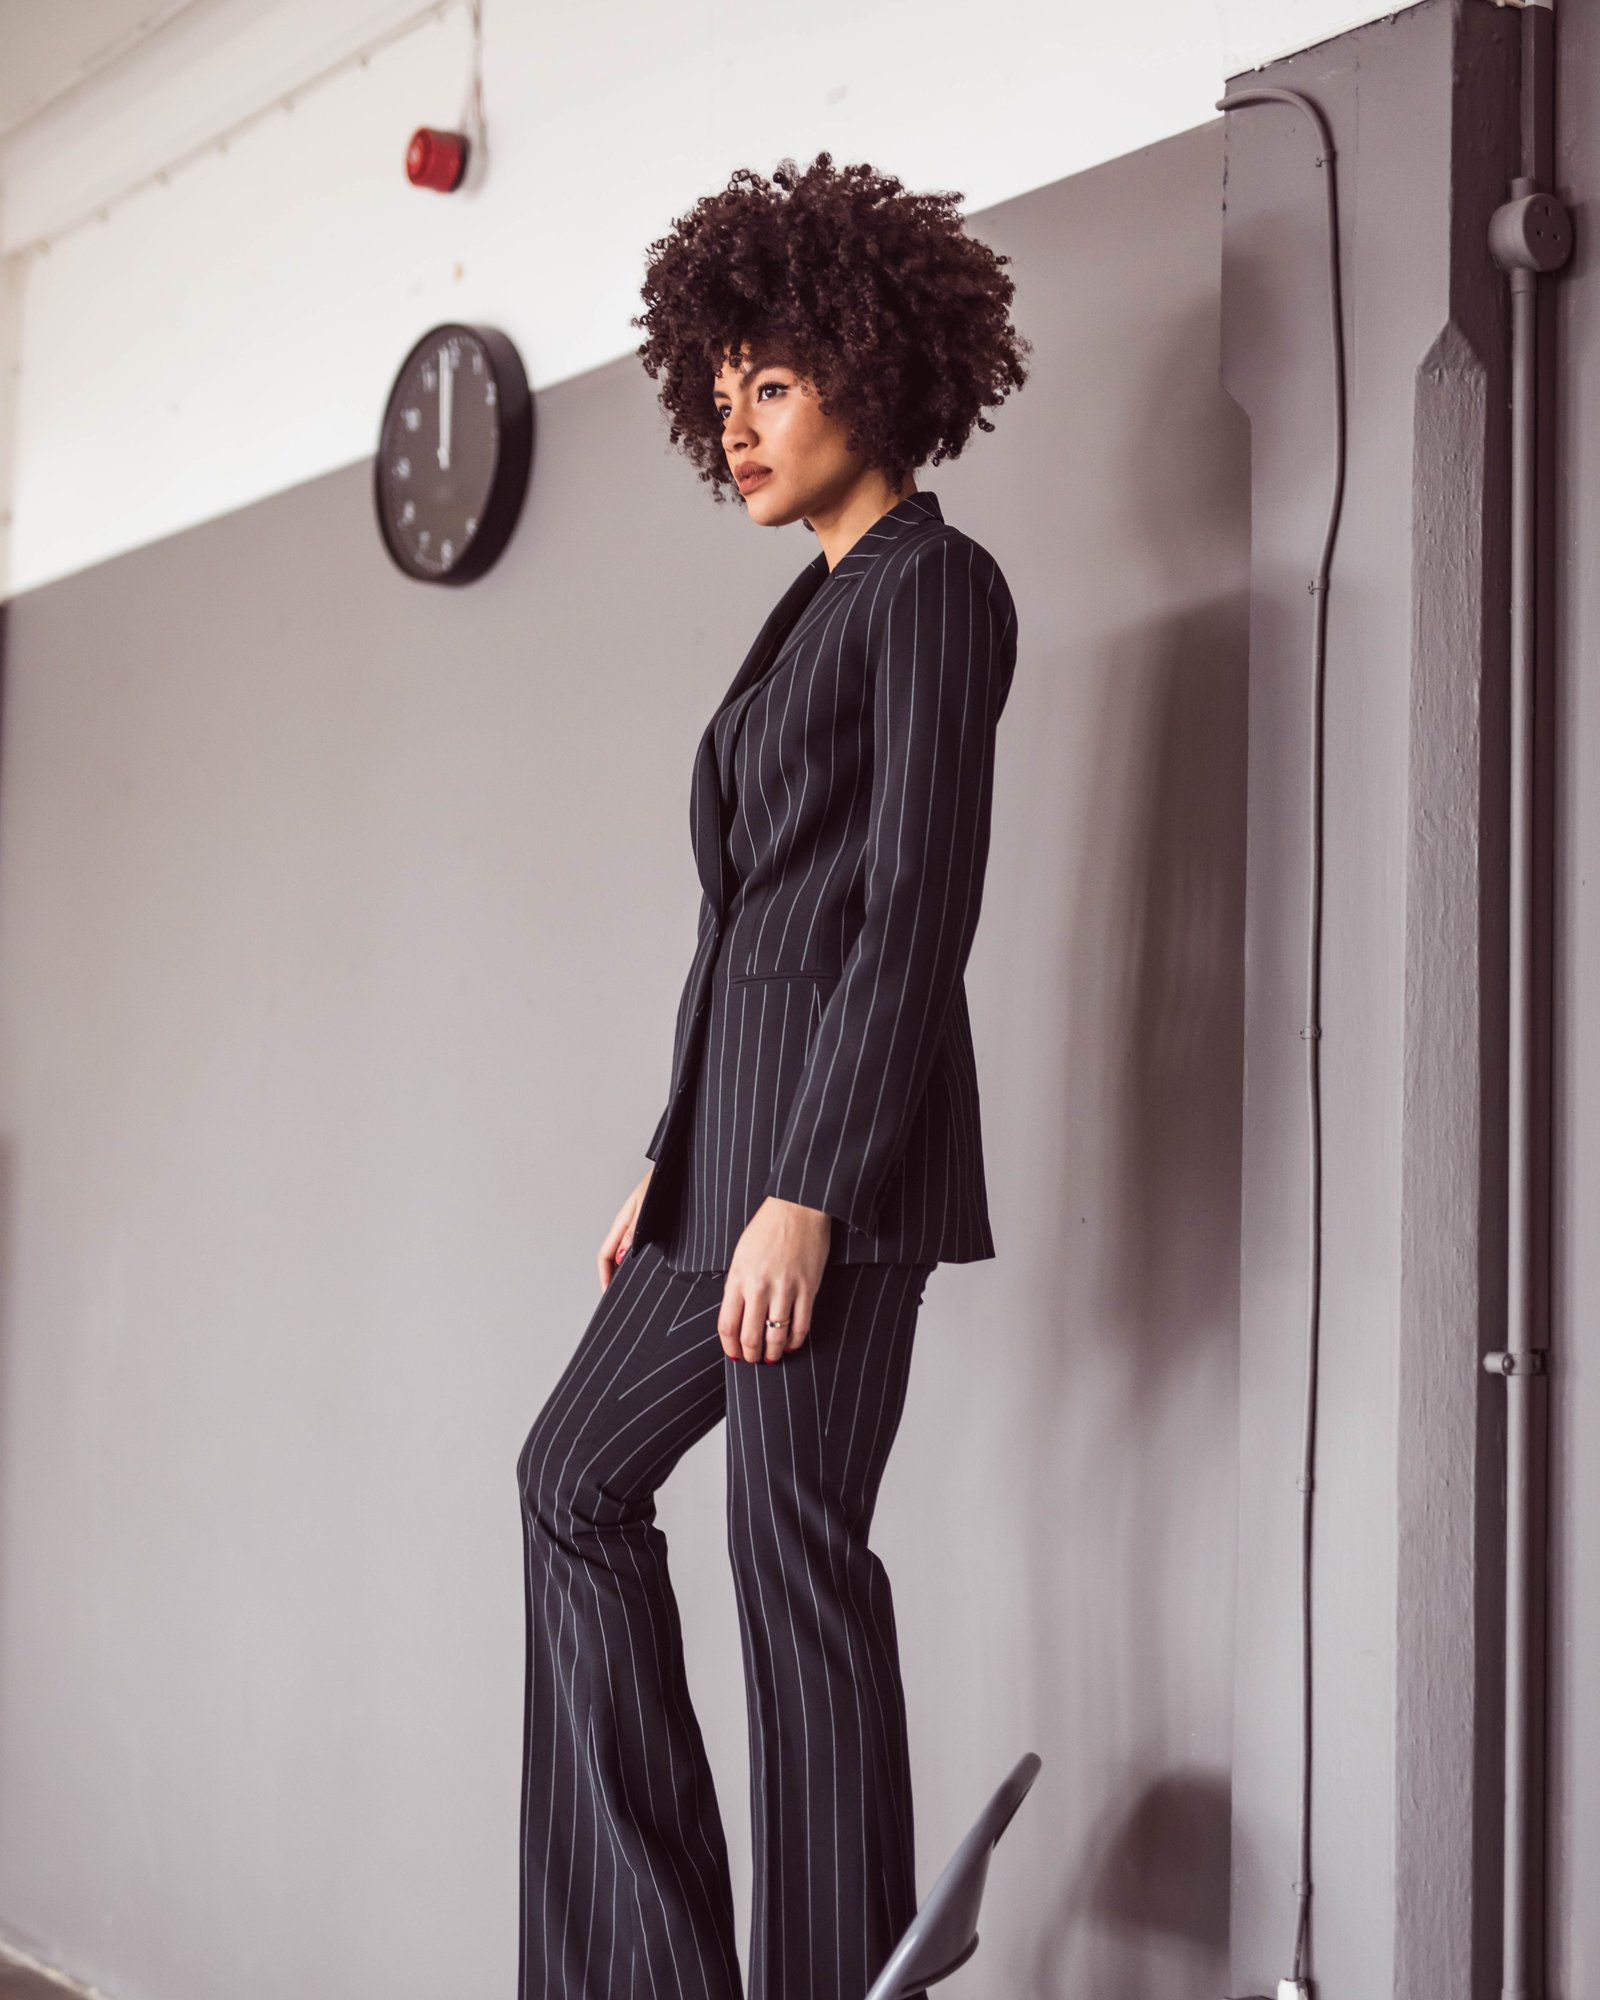 Samio style blogger creative manchester shoot in pin stripe suit